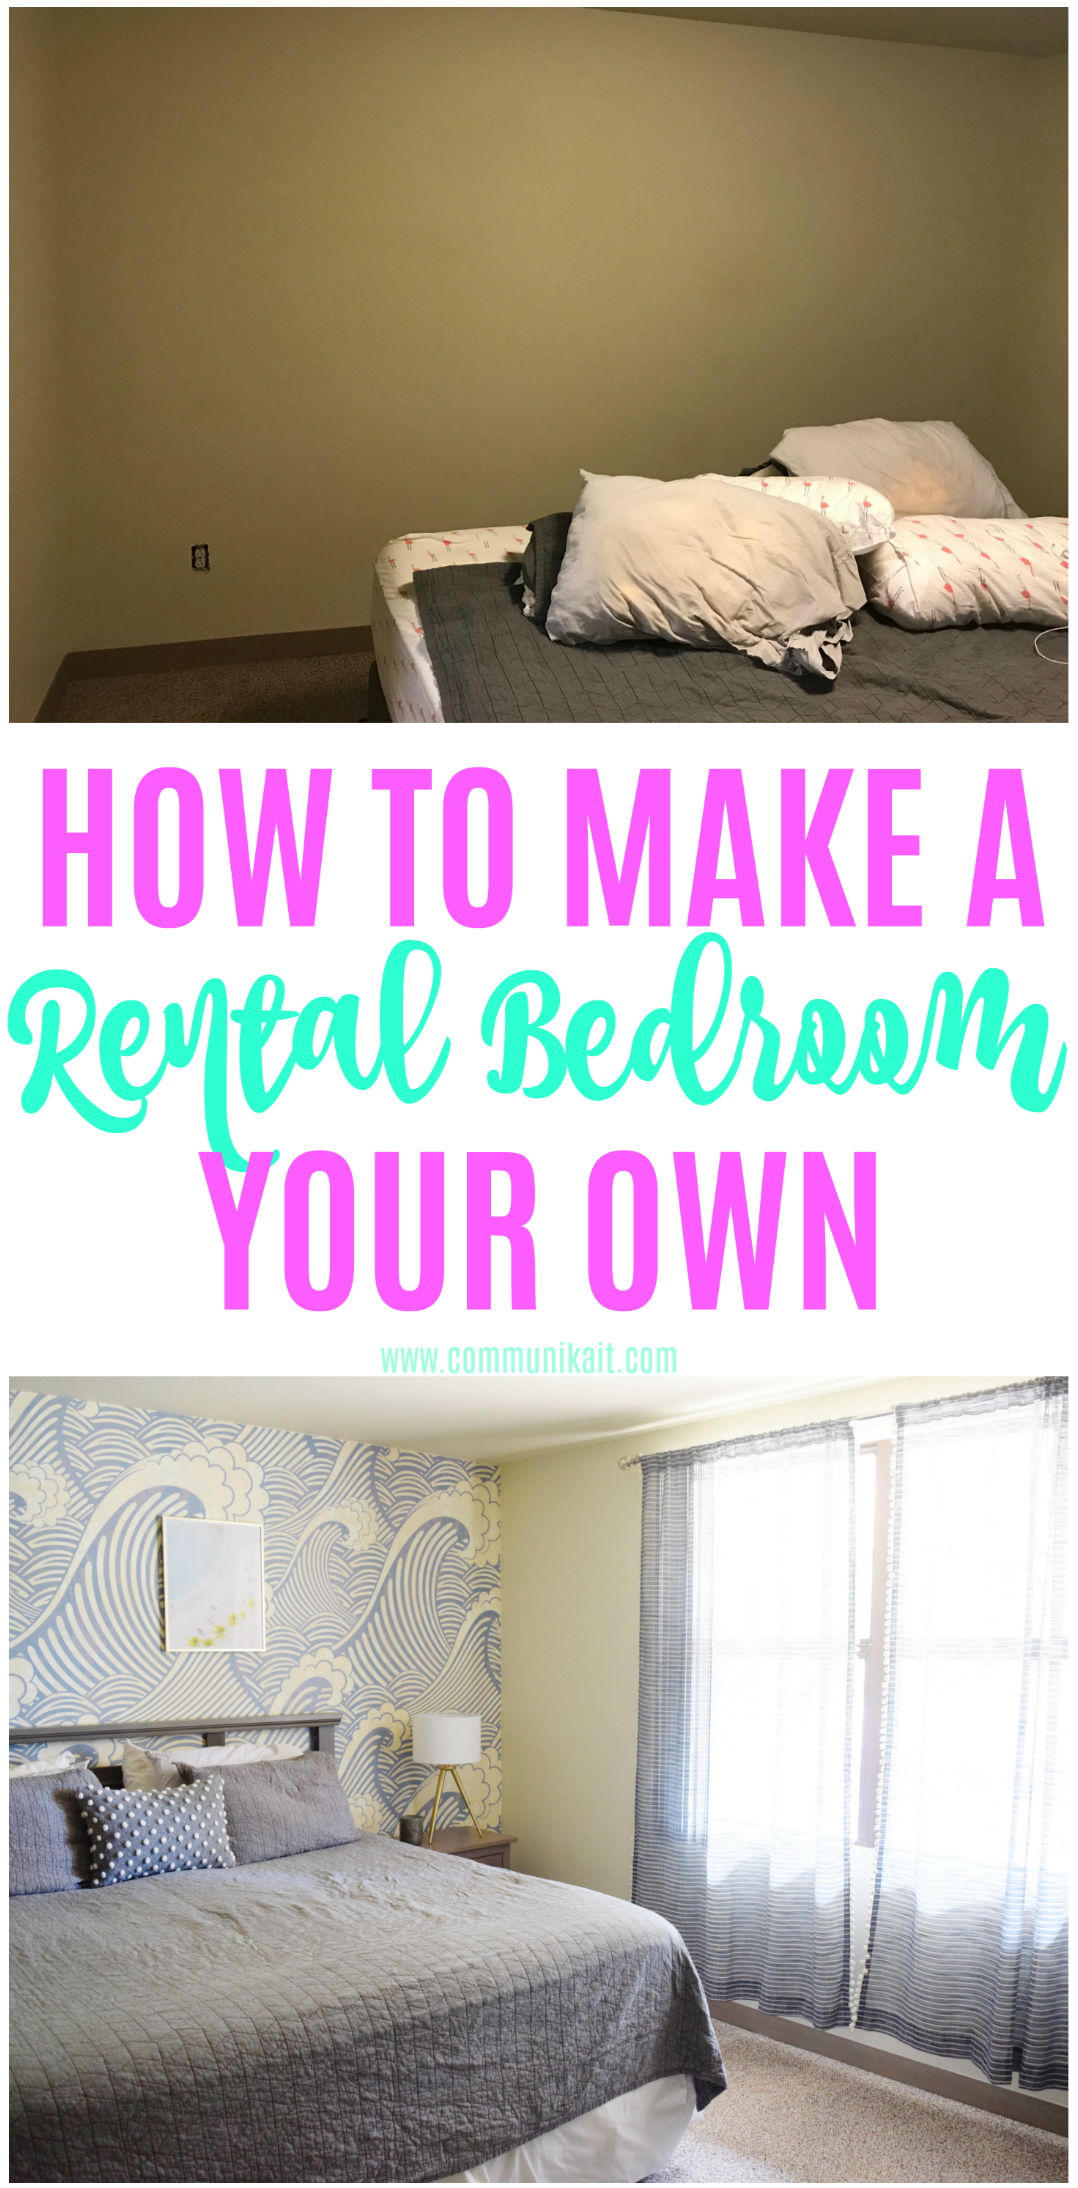 How To Make A Rental Your Own: Master Bedroom Edition -Rental House Decorating - Rental House Hacks - Ideas For Decorating Rental House - Rental House Upgrades On A Budget - Communikait by Kait Hanson